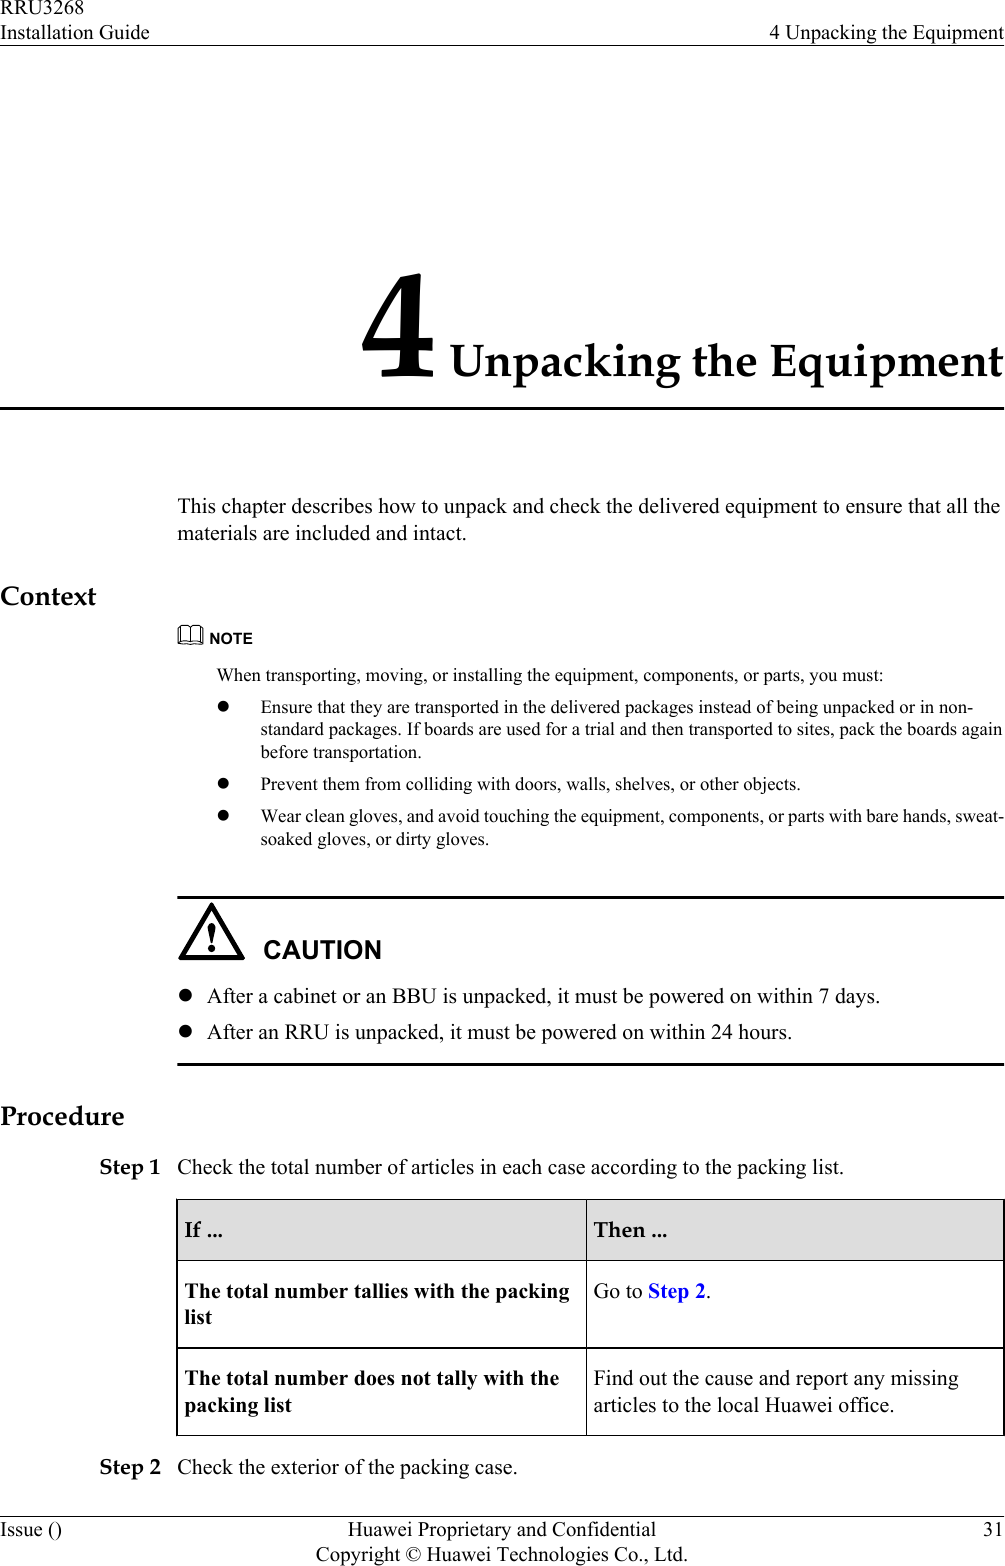 4 Unpacking the EquipmentThis chapter describes how to unpack and check the delivered equipment to ensure that all thematerials are included and intact.ContextNOTEWhen transporting, moving, or installing the equipment, components, or parts, you must:lEnsure that they are transported in the delivered packages instead of being unpacked or in non-standard packages. If boards are used for a trial and then transported to sites, pack the boards againbefore transportation.lPrevent them from colliding with doors, walls, shelves, or other objects.lWear clean gloves, and avoid touching the equipment, components, or parts with bare hands, sweat-soaked gloves, or dirty gloves.CAUTIONlAfter a cabinet or an BBU is unpacked, it must be powered on within 7 days.lAfter an RRU is unpacked, it must be powered on within 24 hours.ProcedureStep 1 Check the total number of articles in each case according to the packing list.If ... Then ...The total number tallies with the packinglistGo to Step 2.The total number does not tally with thepacking listFind out the cause and report any missingarticles to the local Huawei office.Step 2 Check the exterior of the packing case.RRU3268Installation Guide 4 Unpacking the EquipmentIssue () Huawei Proprietary and ConfidentialCopyright © Huawei Technologies Co., Ltd.31